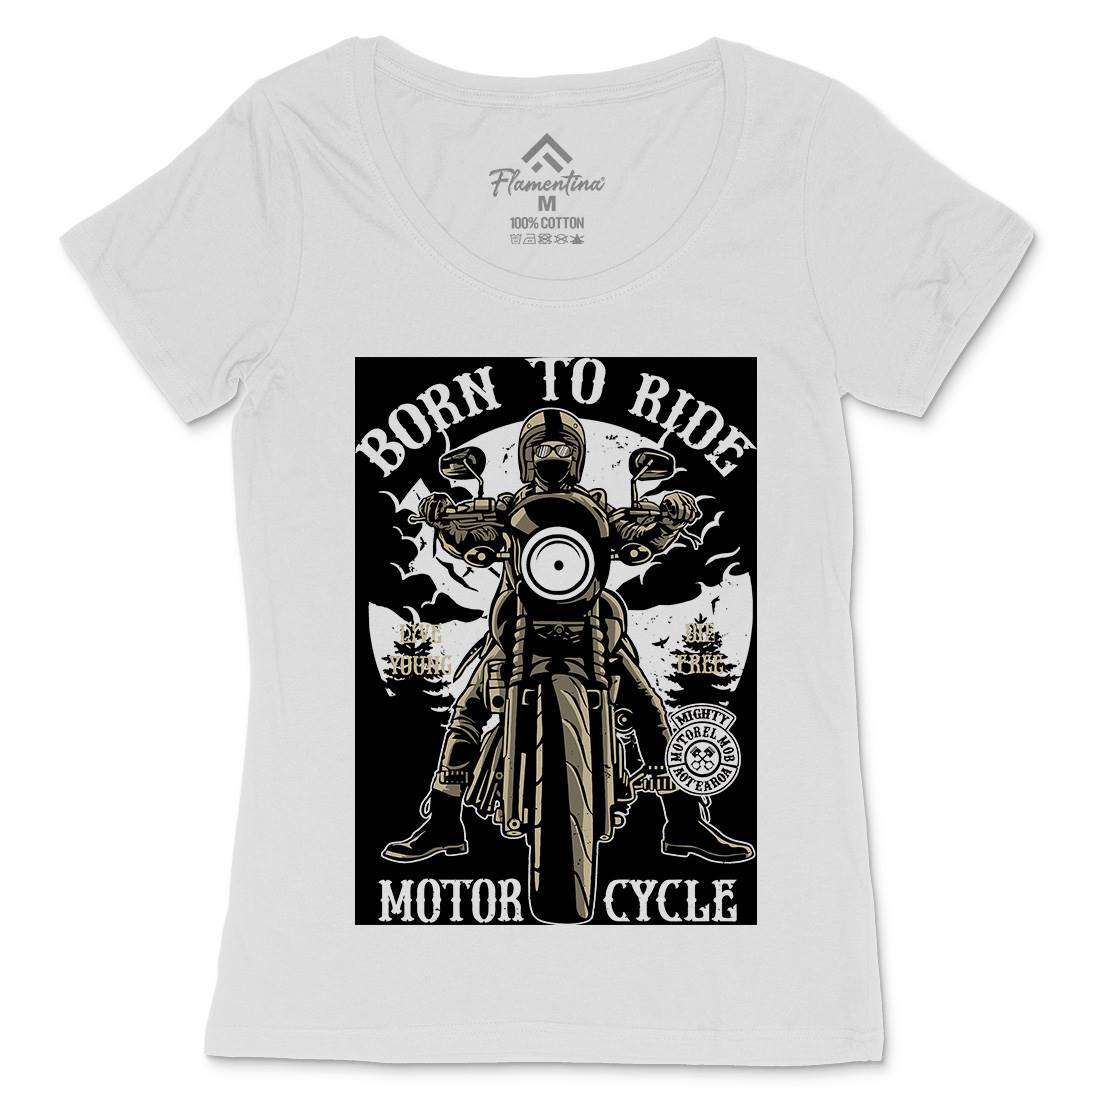 Born To Ride Womens Scoop Neck T-Shirt Motorcycles A512